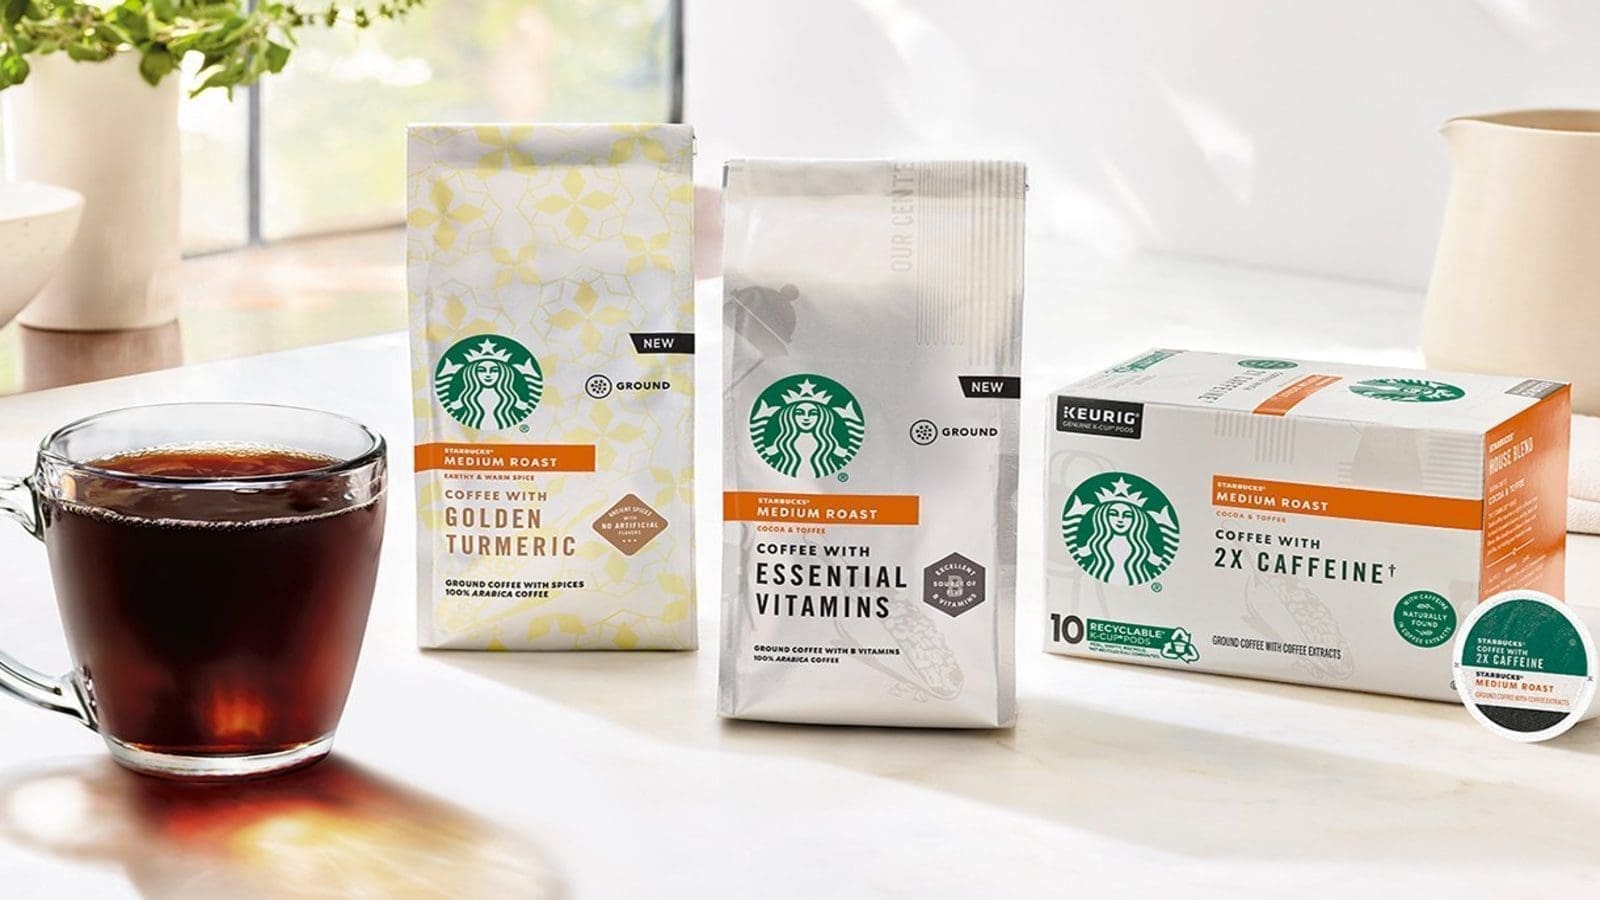 Starbucks extends RTD coffee partnership with Nestlé to expand global reach of its brand